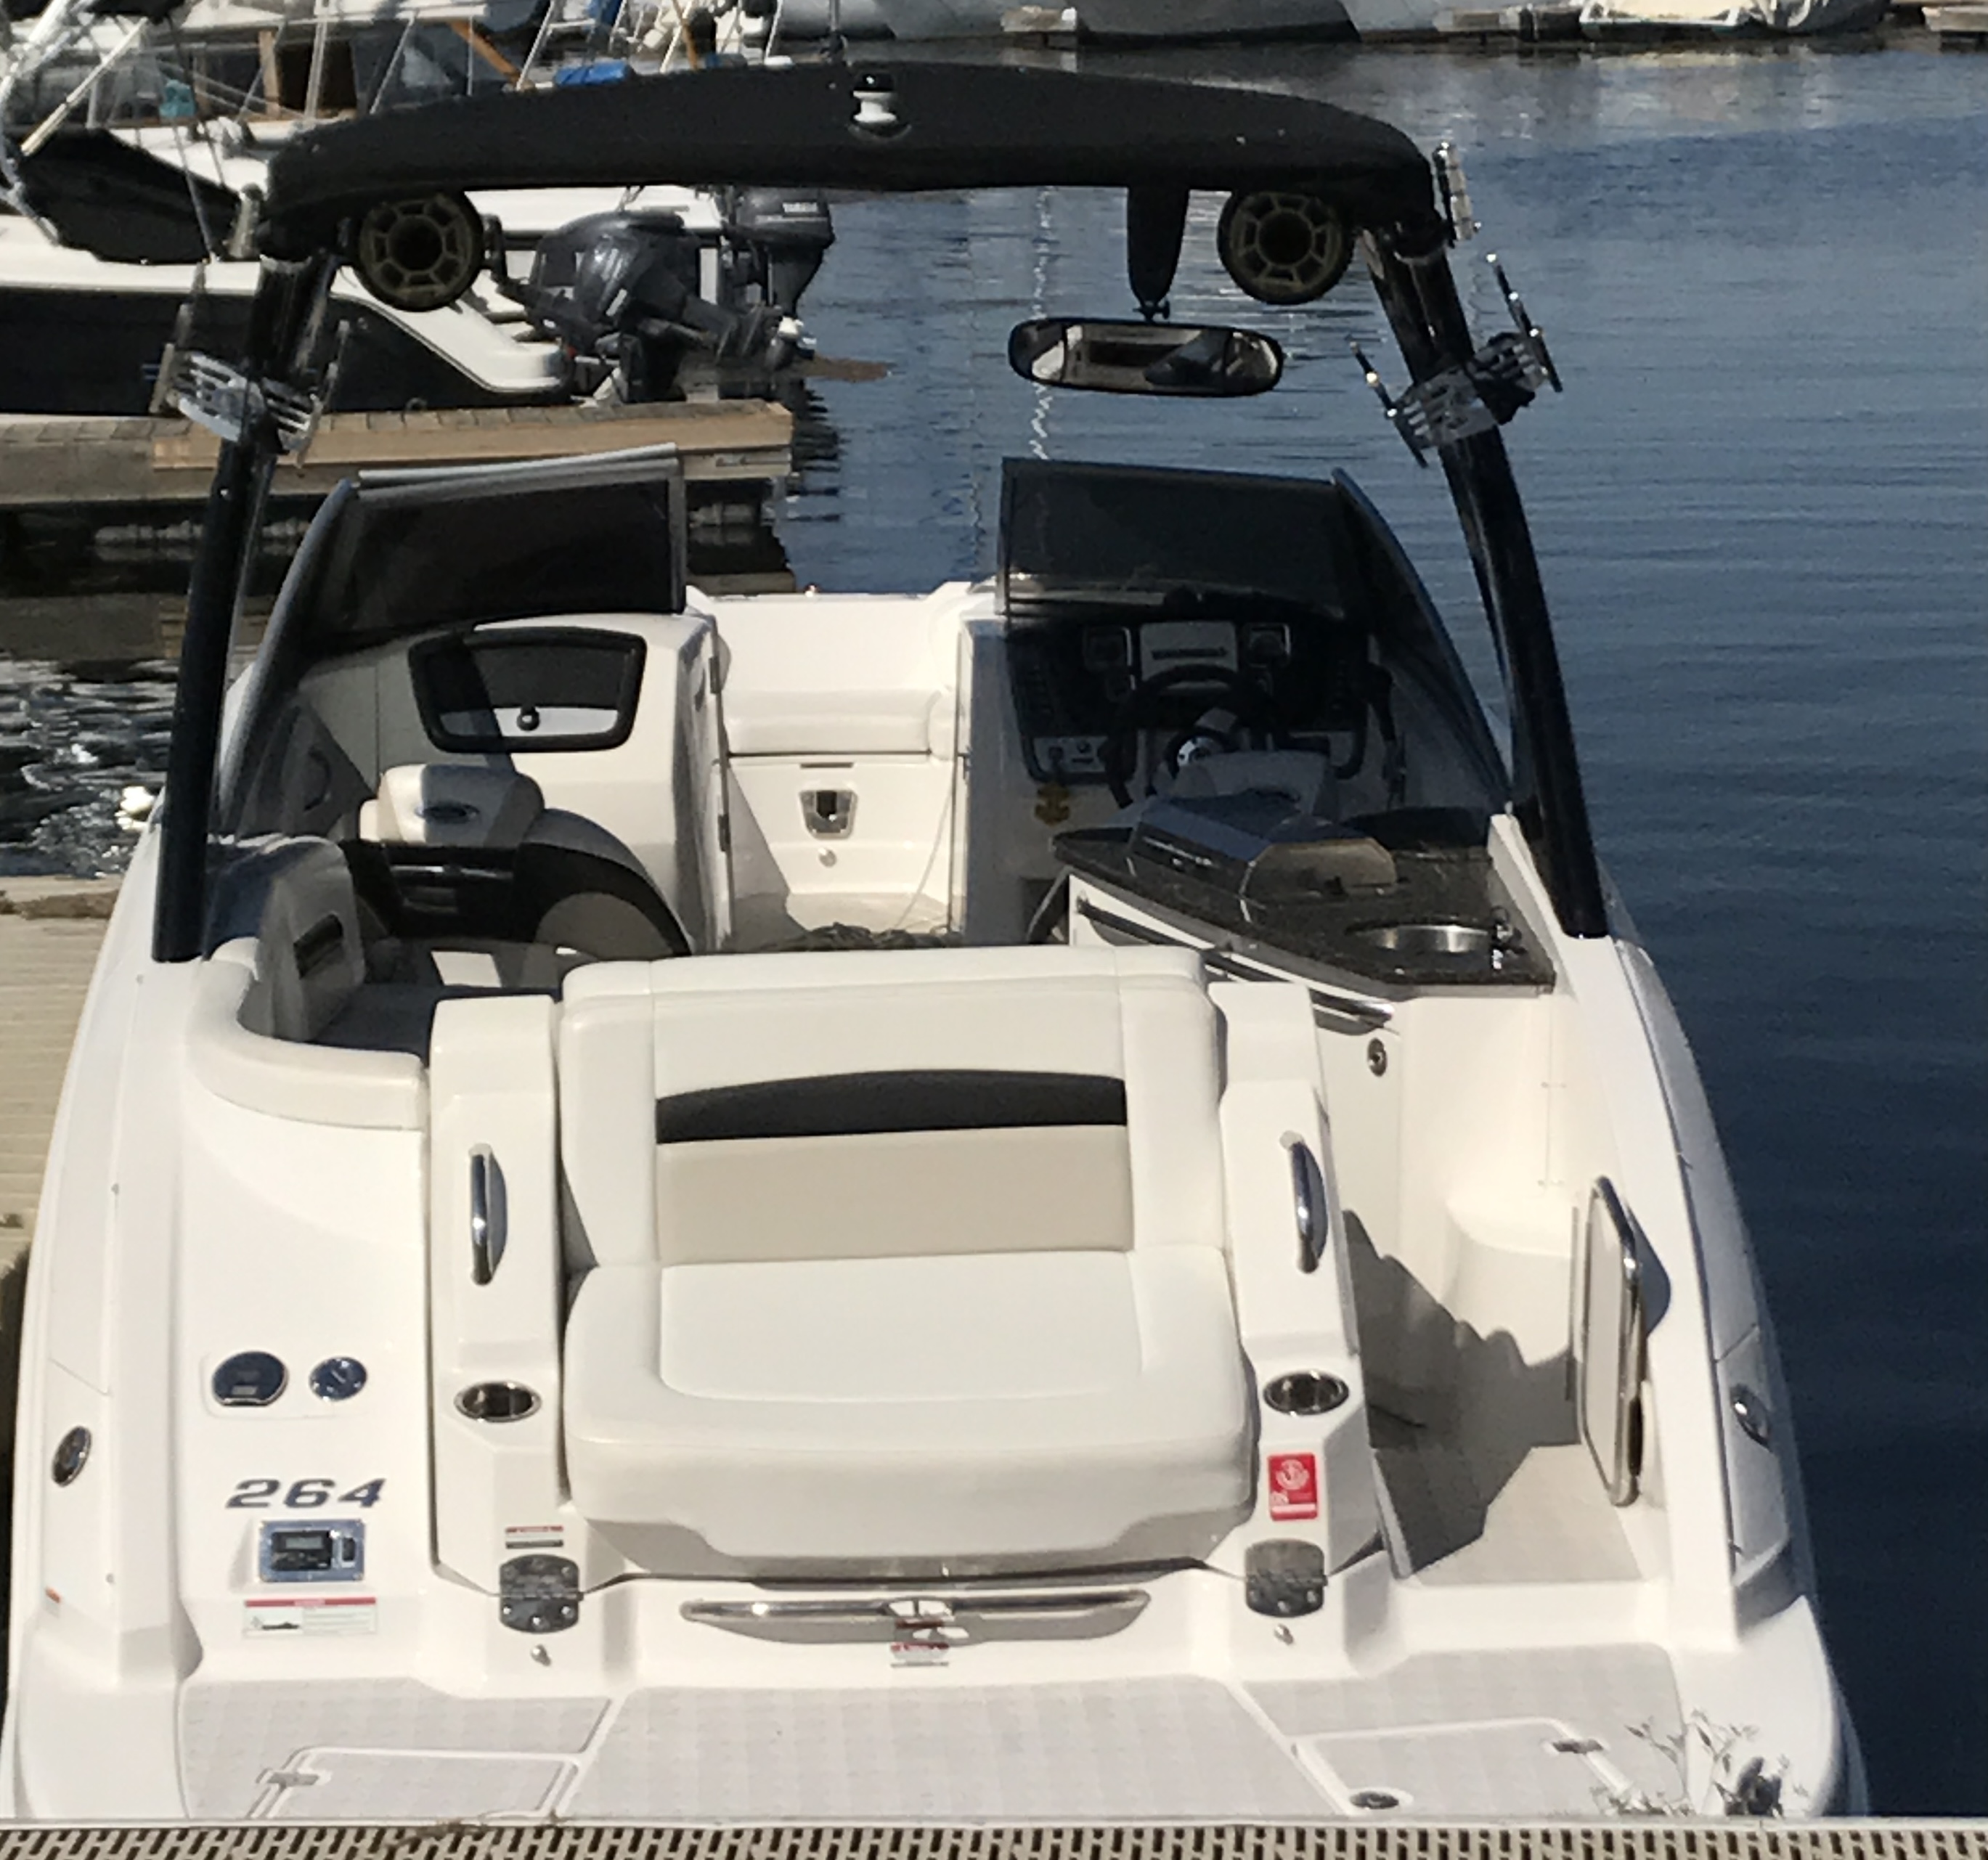 2008 Chaparral 264 Sunesta Power boat for sale in Hermiston, OR - image 8 